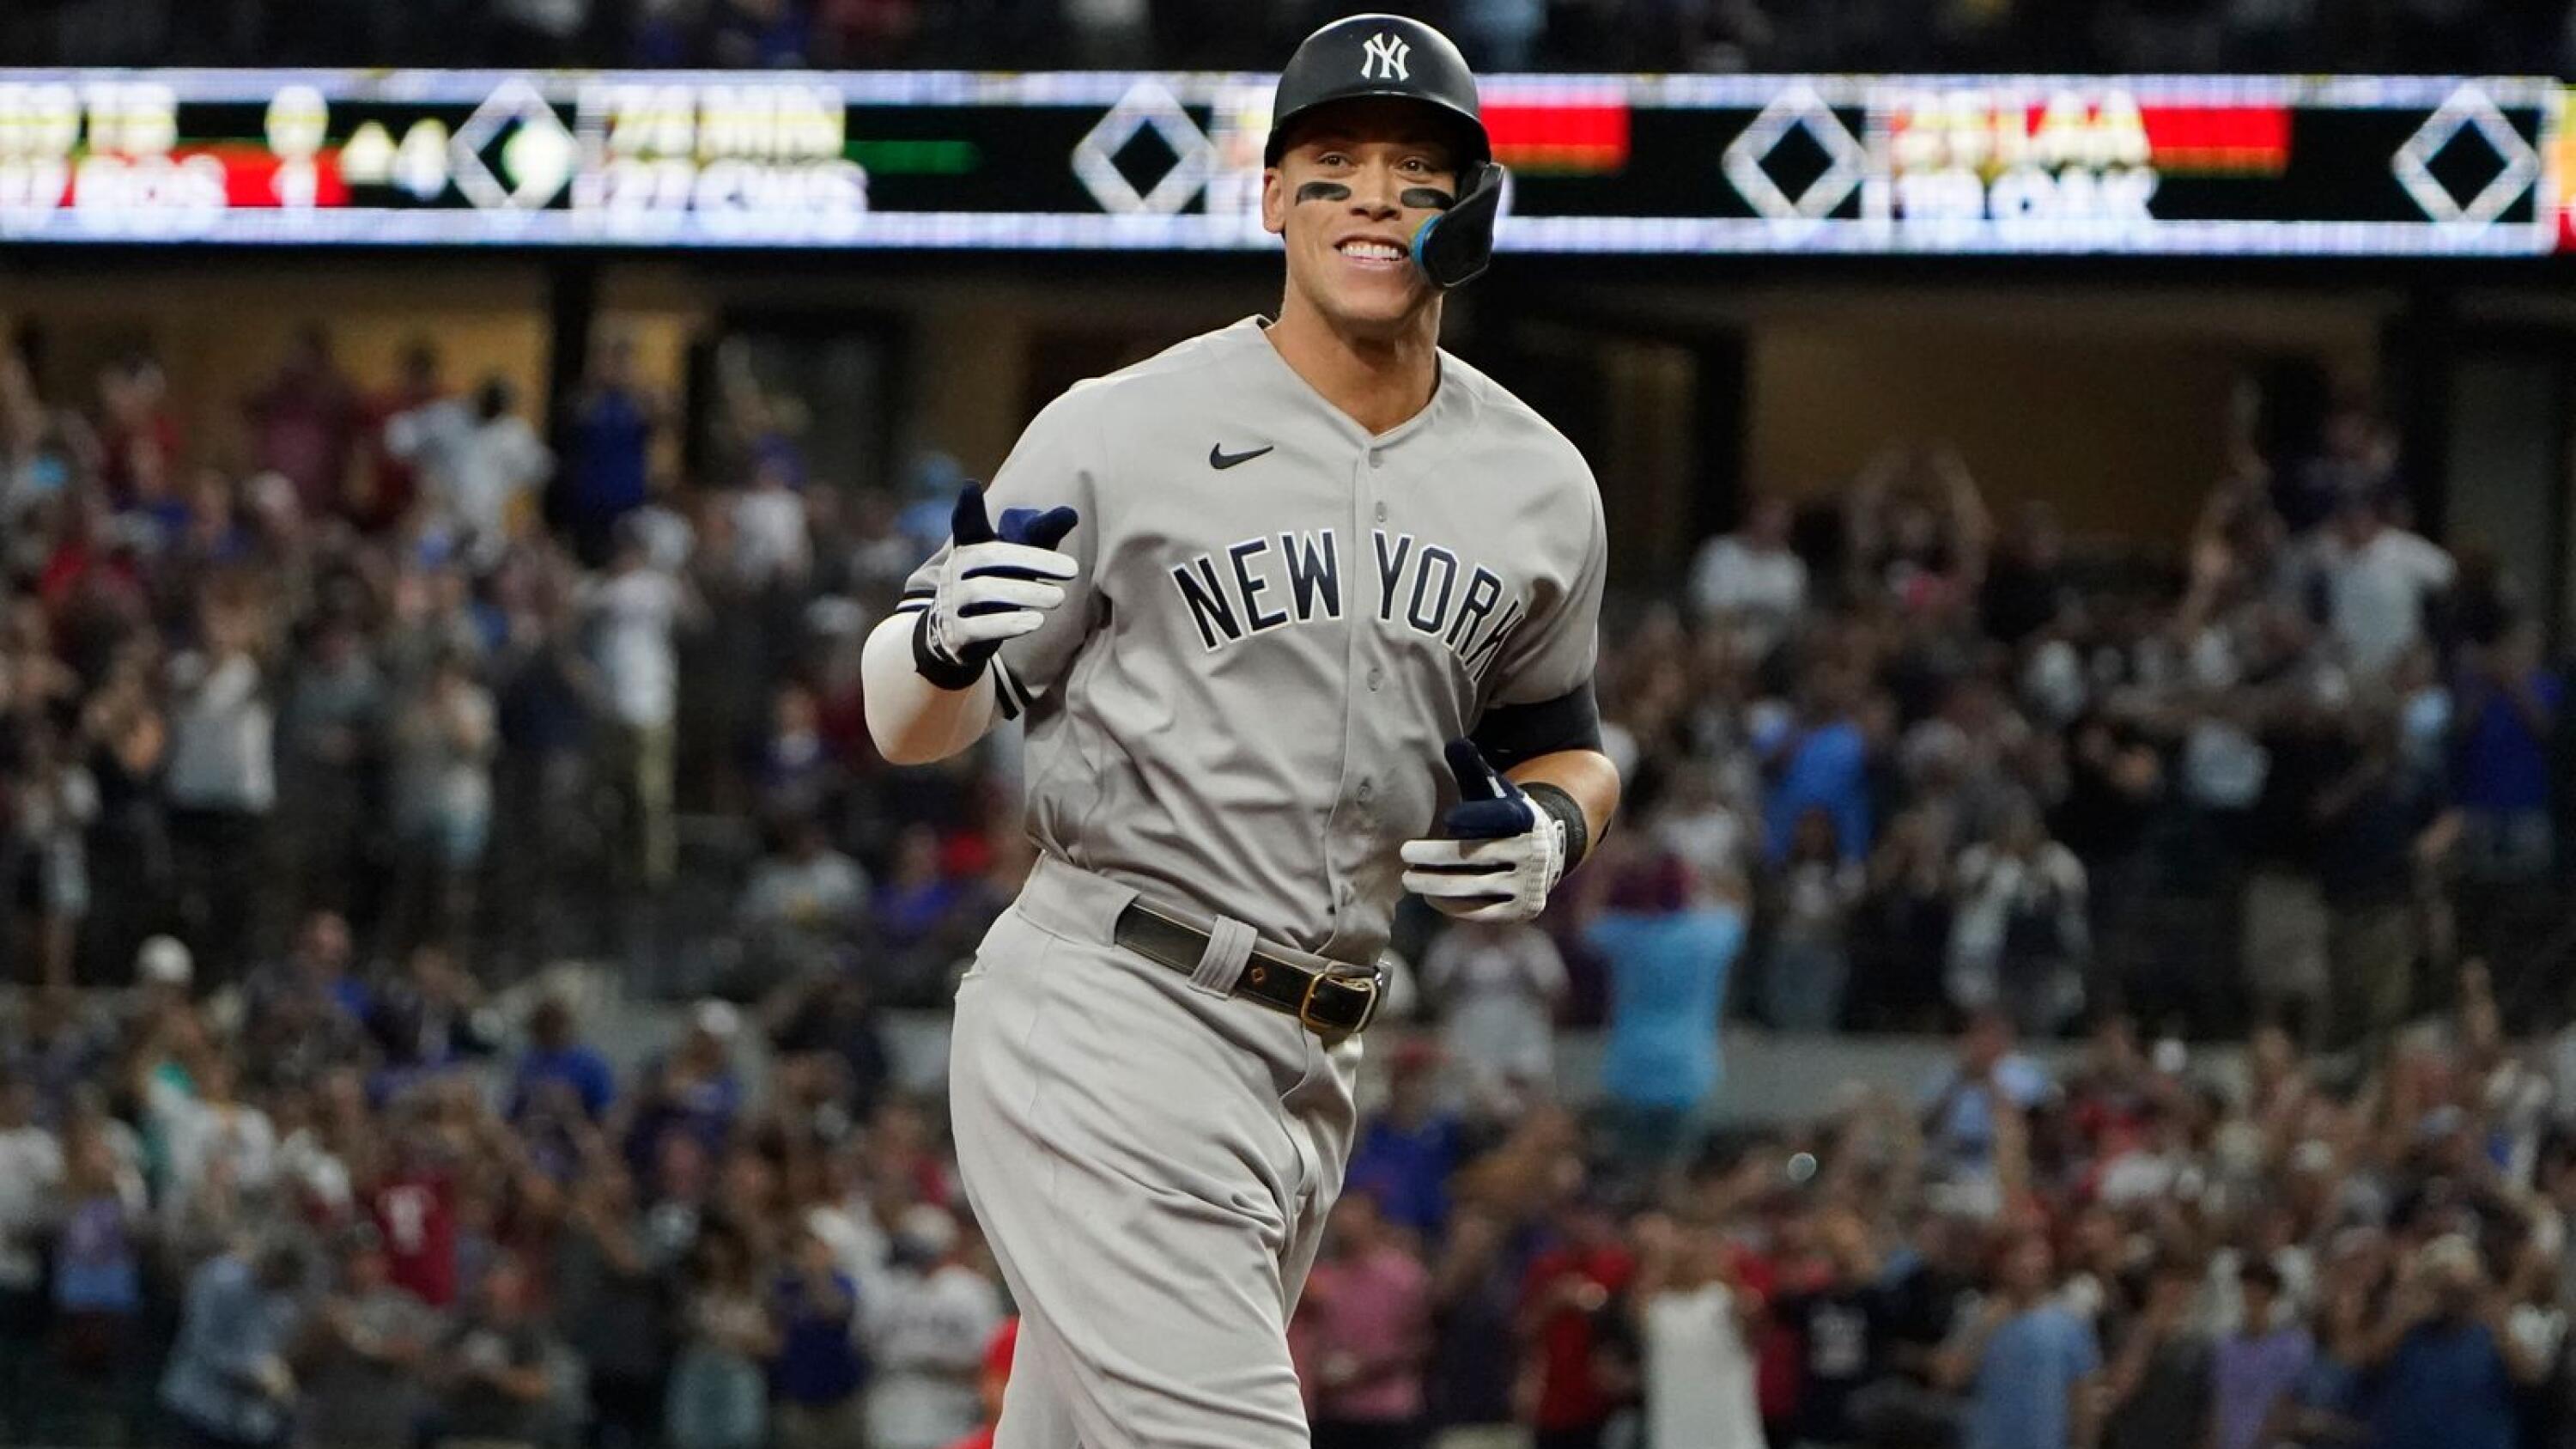 Aaron Judge has a homer and 3 hits in his 2nd game back to help the Yankees  top the Orioles 8-3 - The San Diego Union-Tribune